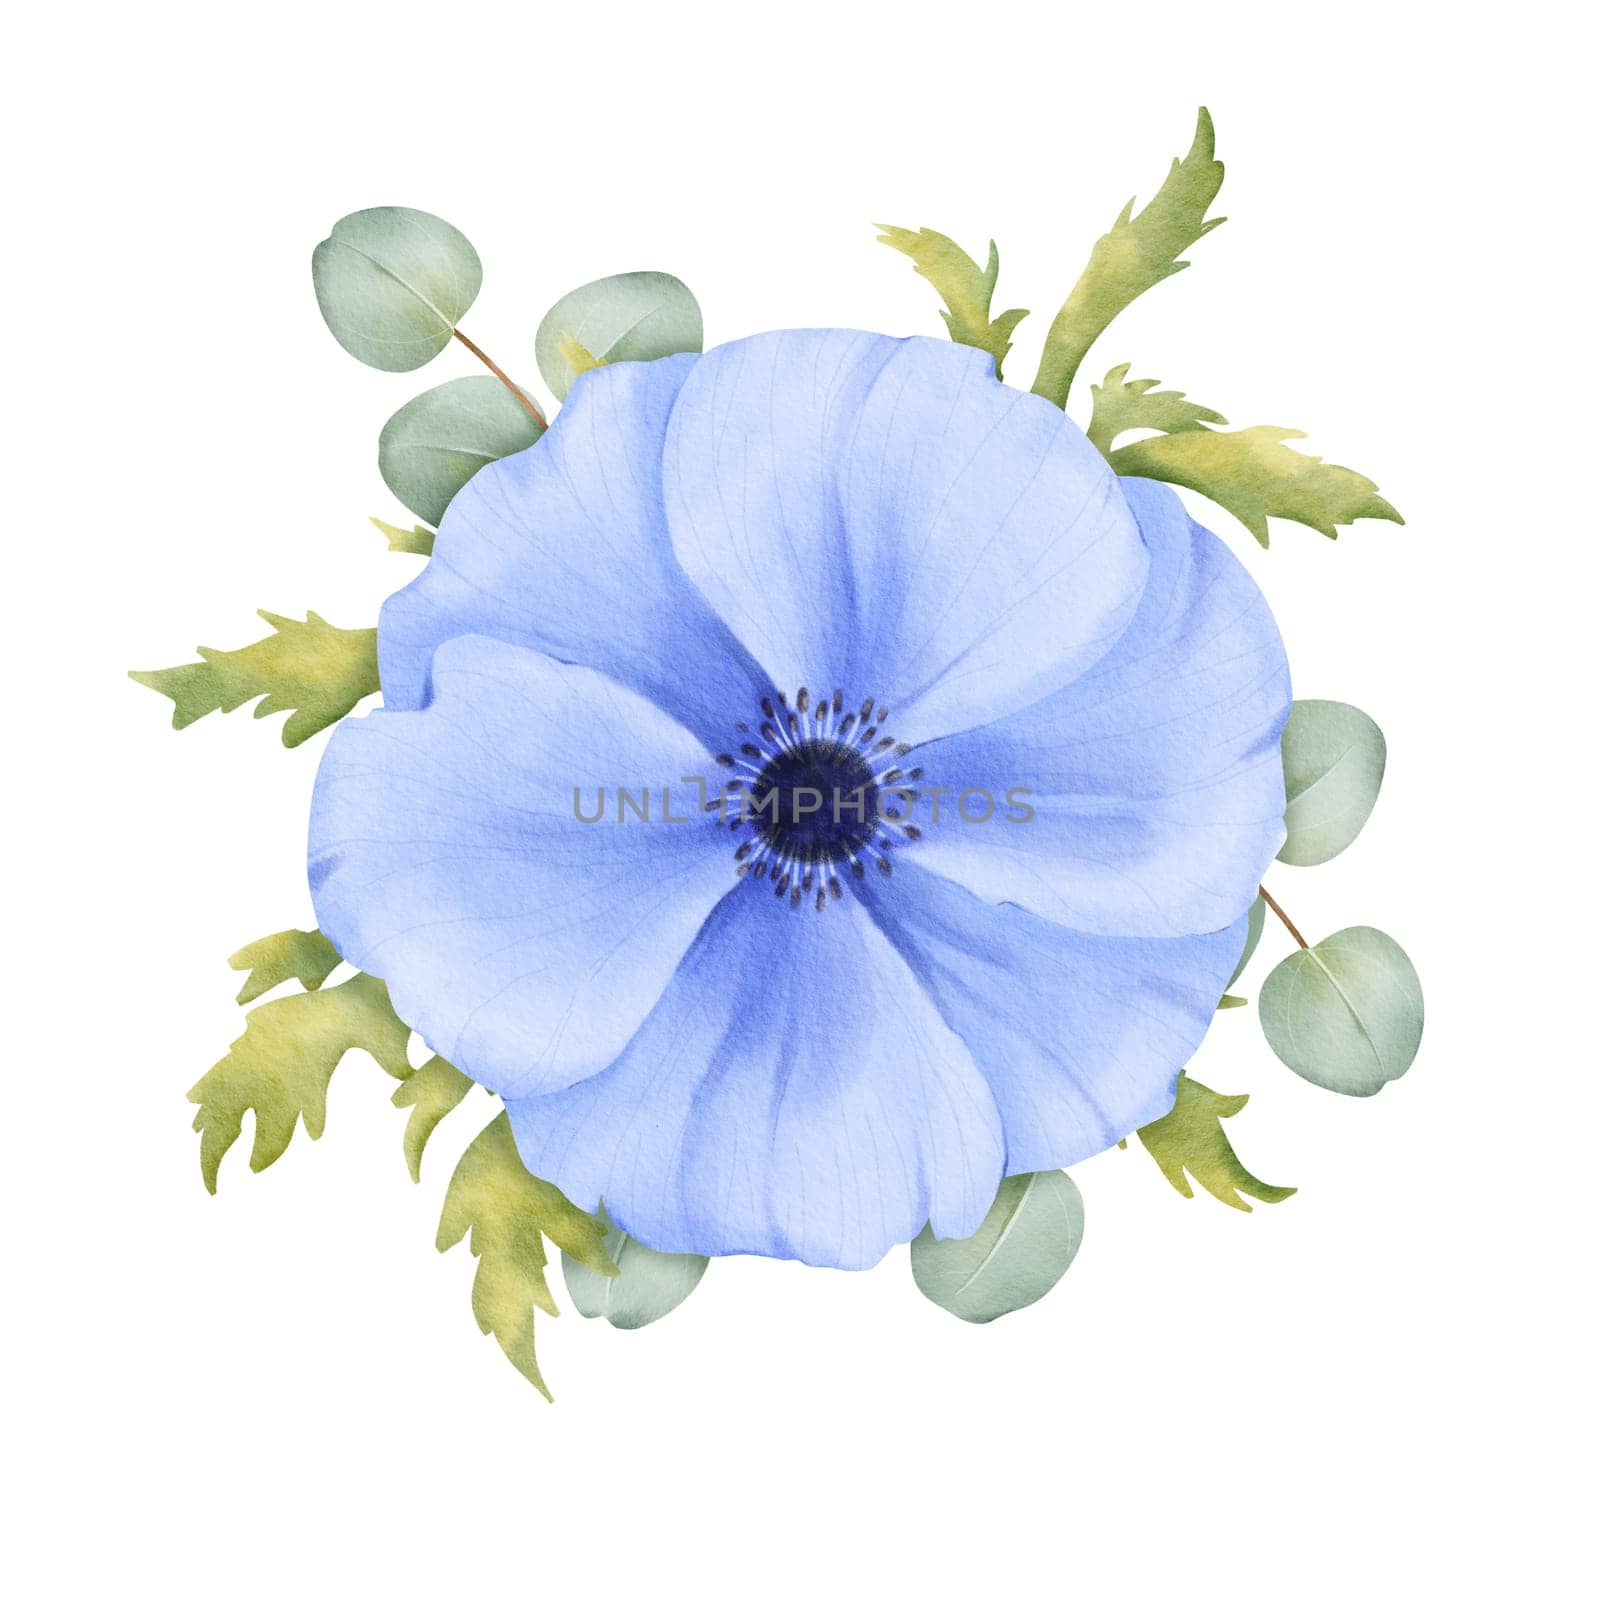 An blue anemone floral arrangement with fresh greenery and eucalyptus leaves. watercolor illustration for event decorations, party invitations, digital branding or product packaging.